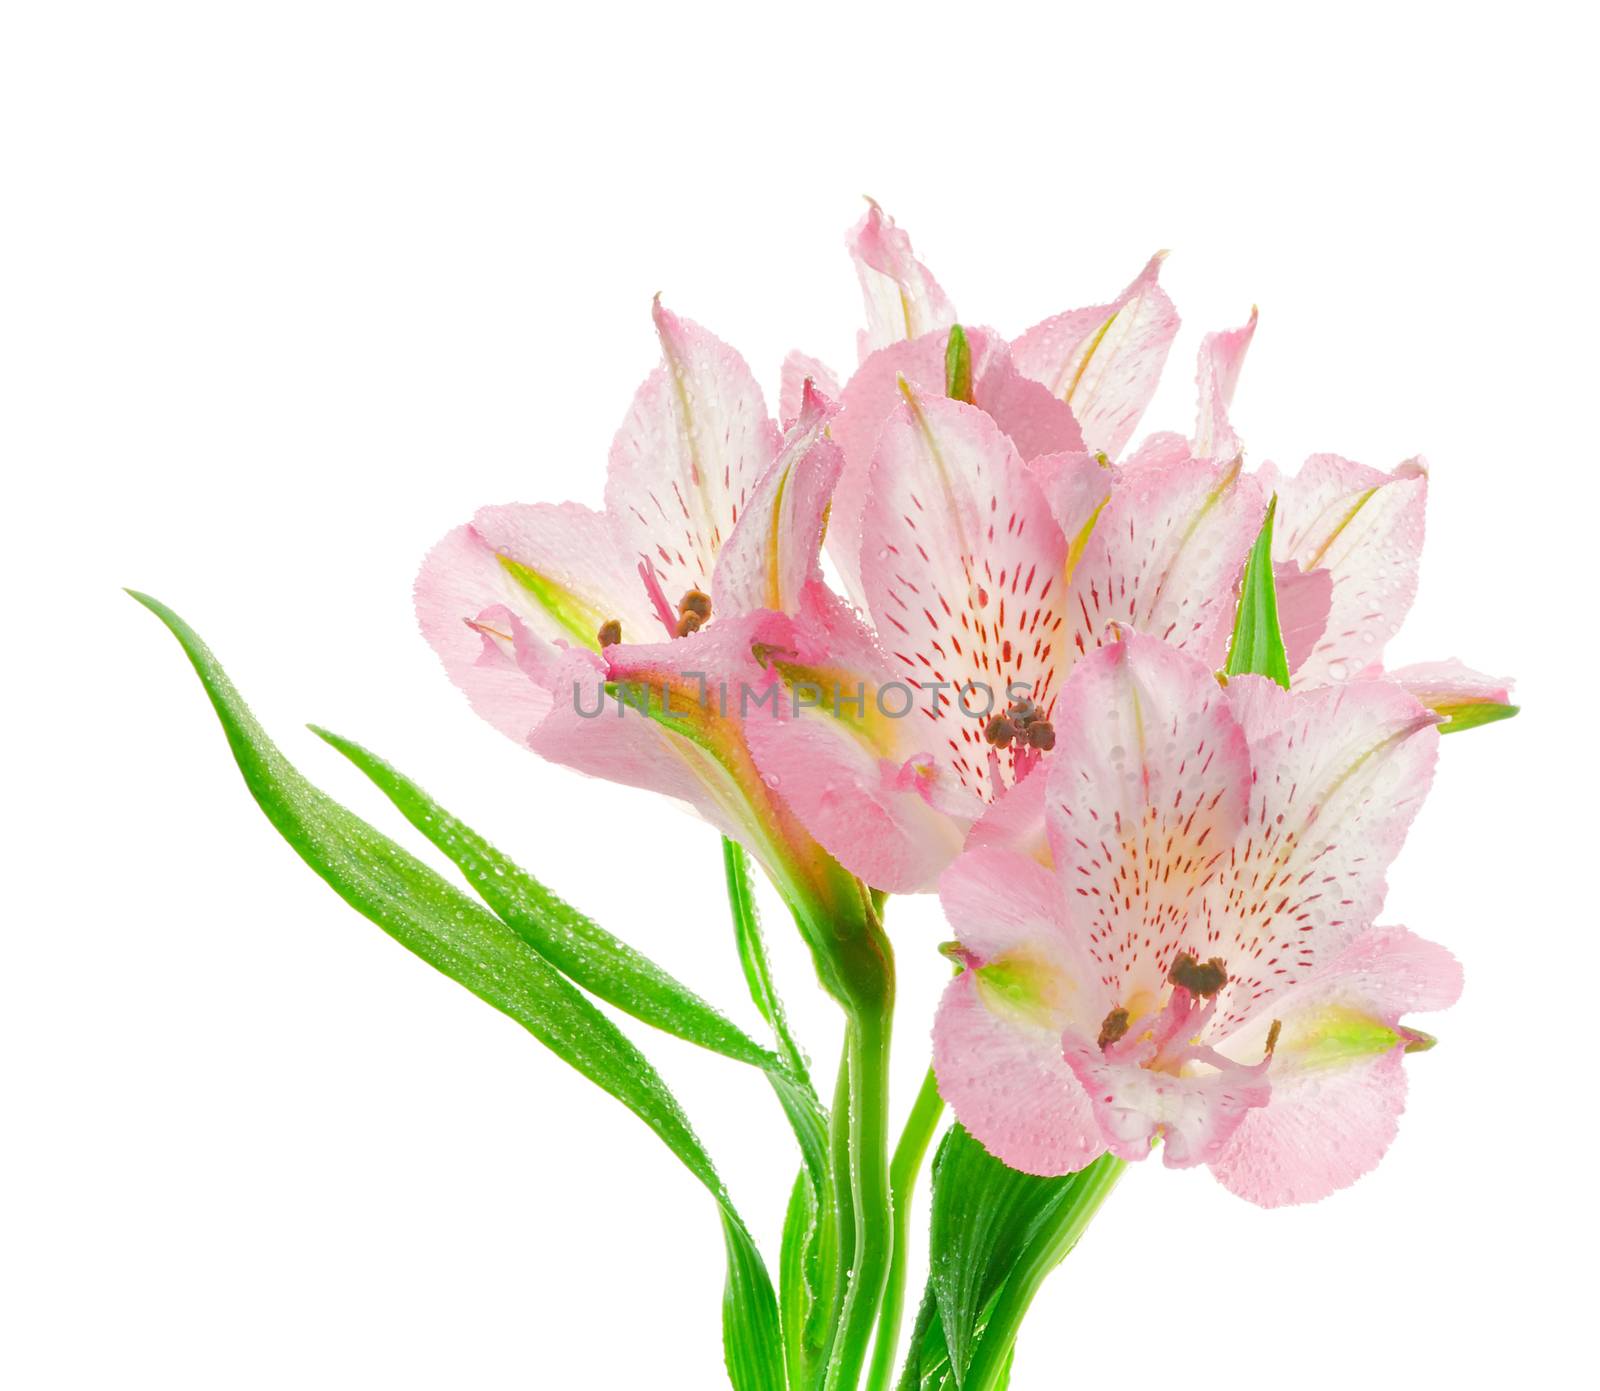 Inflorescence of Beautiful Pink Alstroemeria with Droplets in Shadow isolated on White background